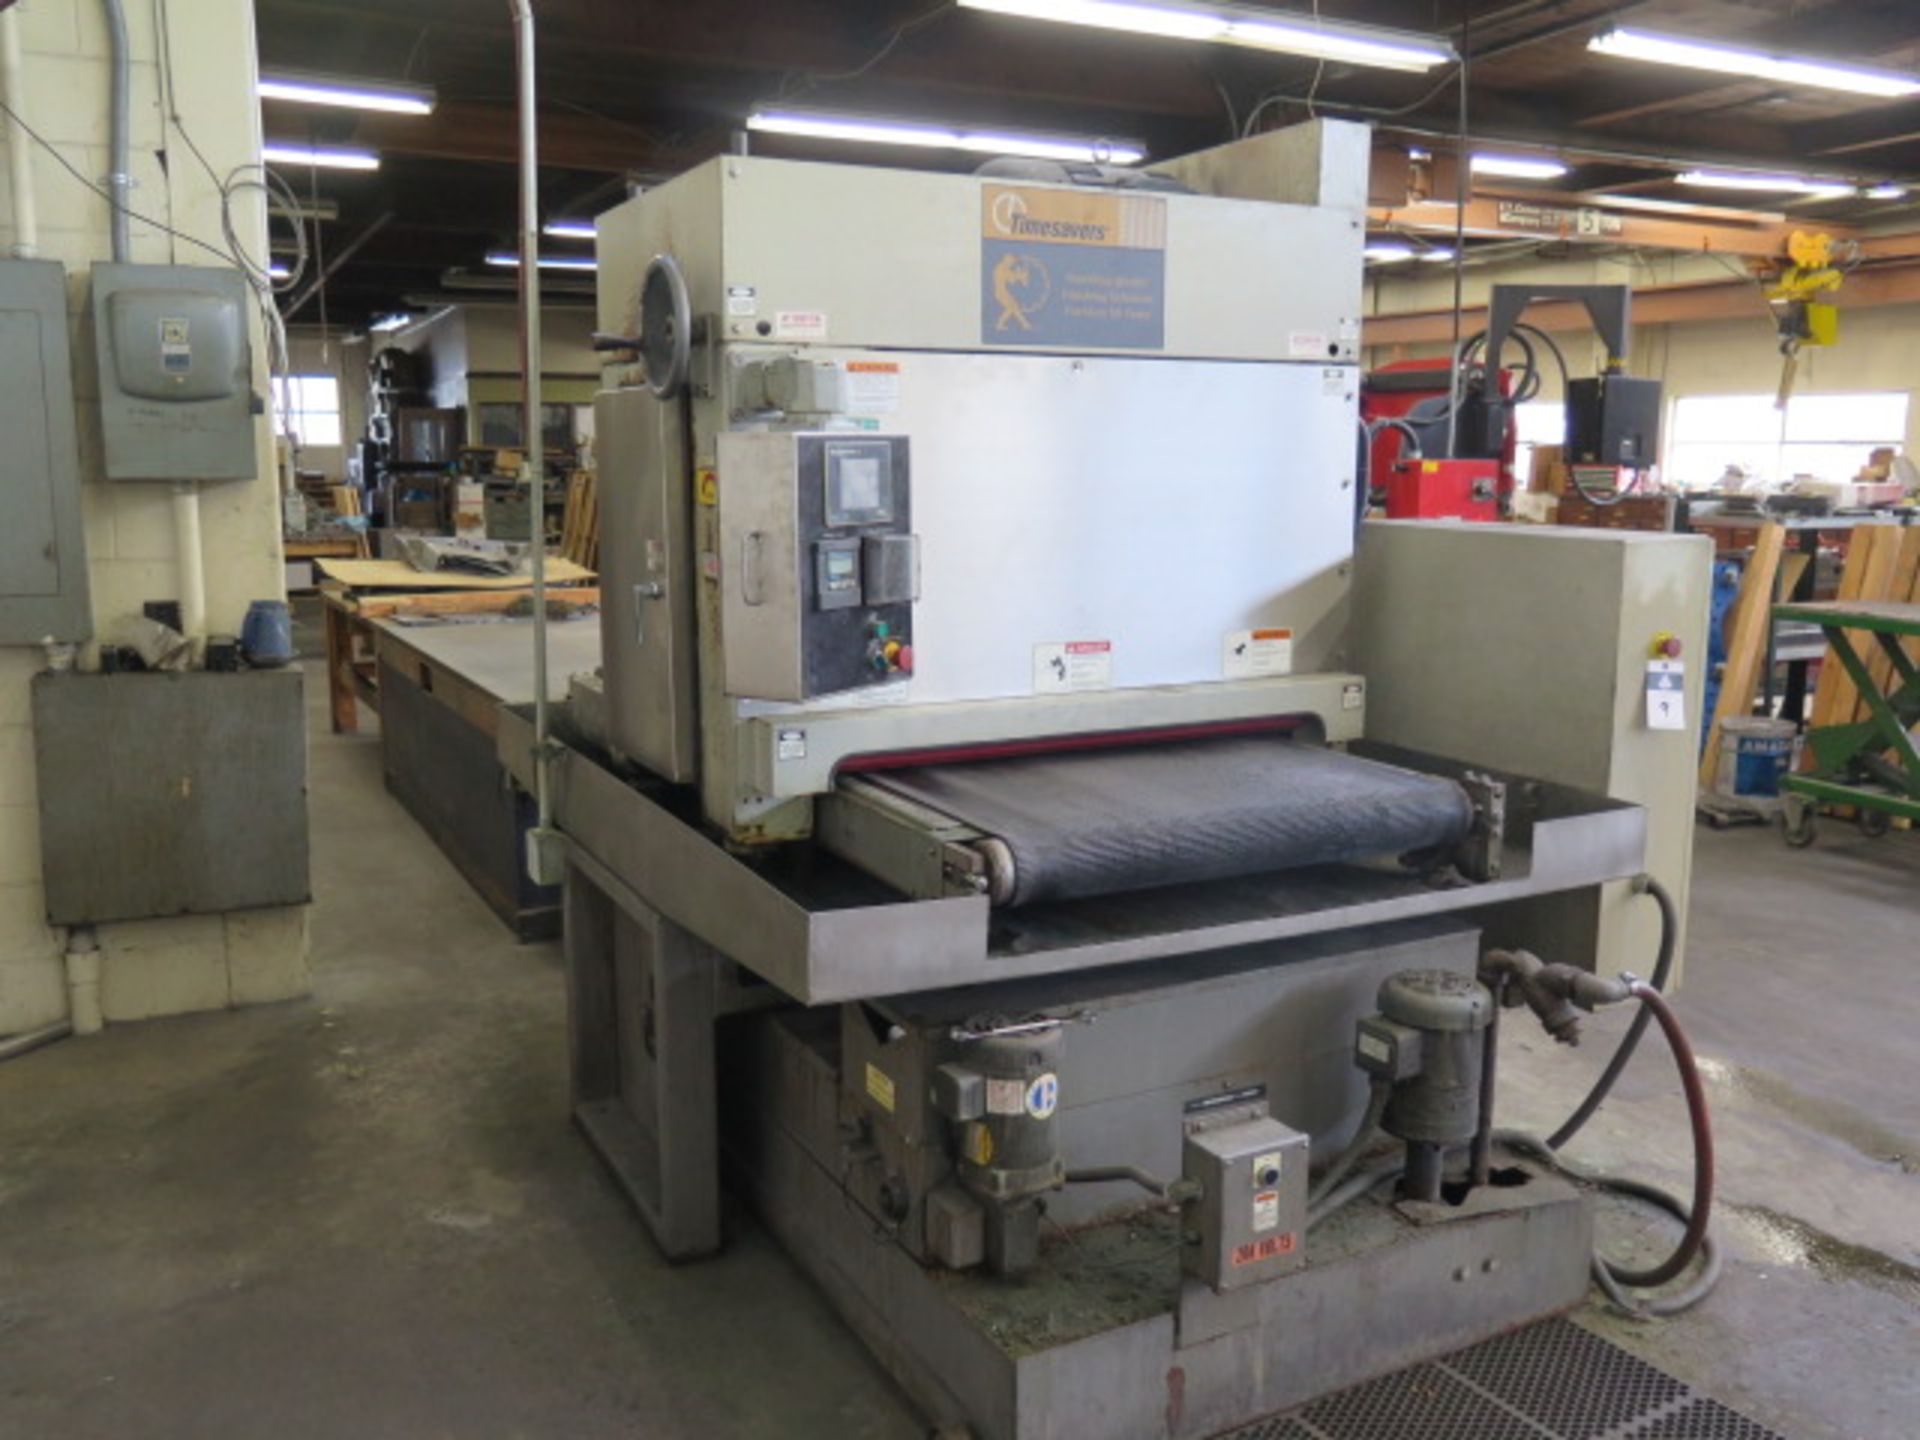 Timesavers mdl. 137-1HDMW 37" Wet-Belt Grainer s/n 26337M w/ Quick Panel Jr. PLC Control, SOLD AS IS - Image 3 of 12